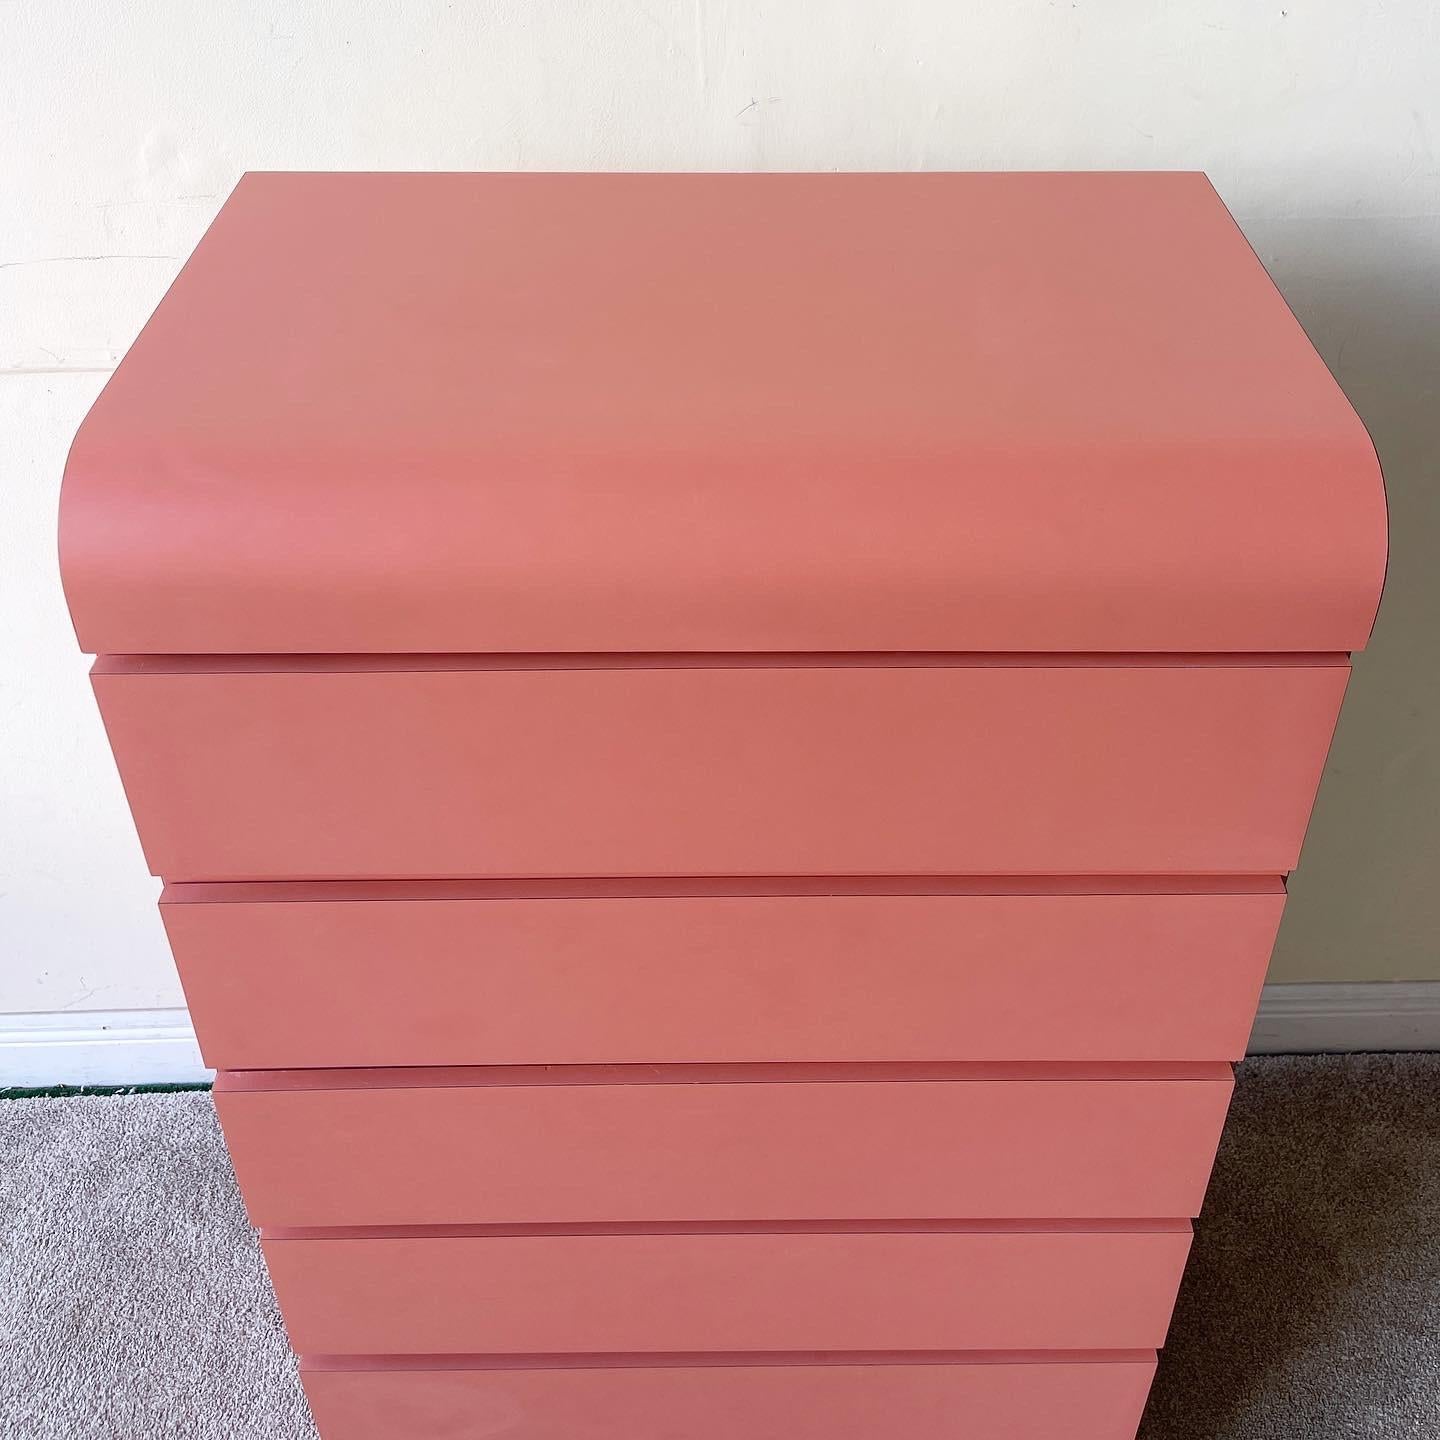 Incredible postmodern waterfall highboy dresser. Features a hot dark pink laminate and 6 spacious drawers.
 